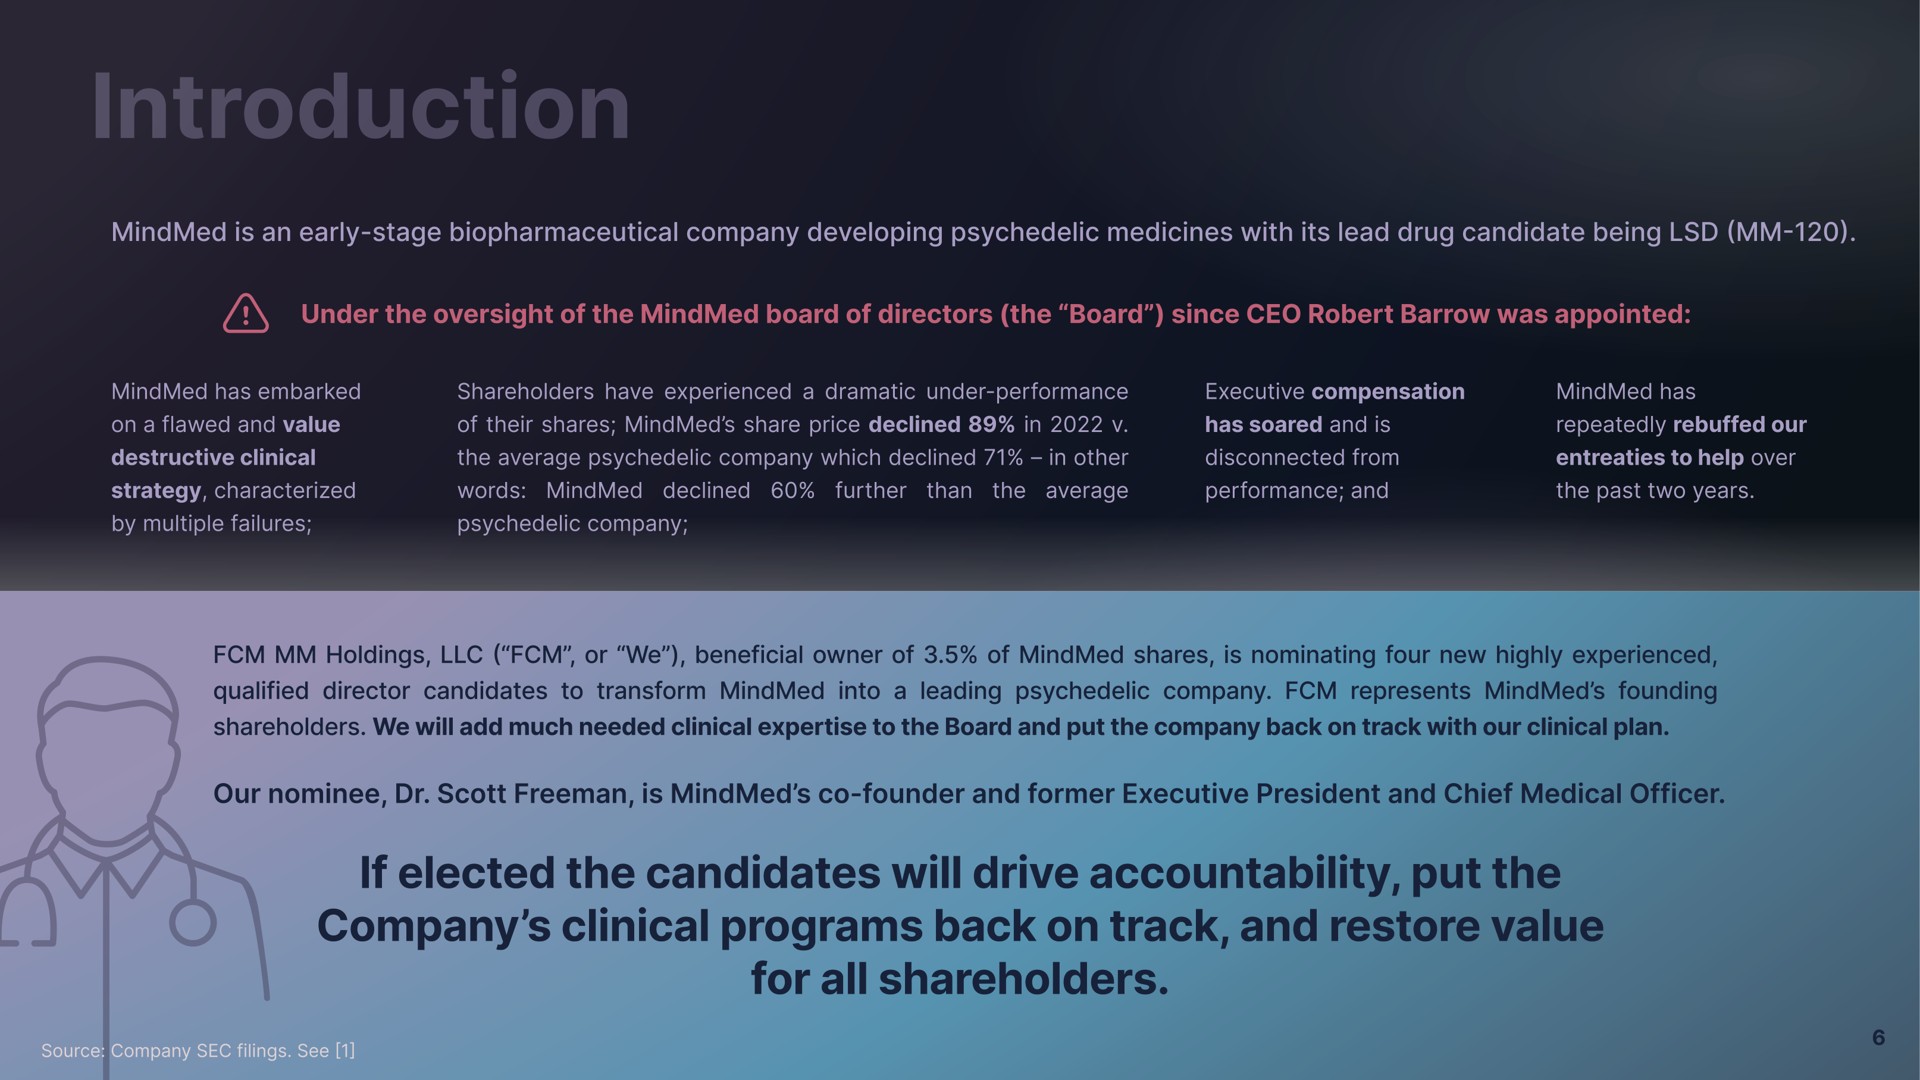 for all shareholders if elected the candidates will drive accountability put the company clinical programs back on track and restore value | Freeman Capital Management